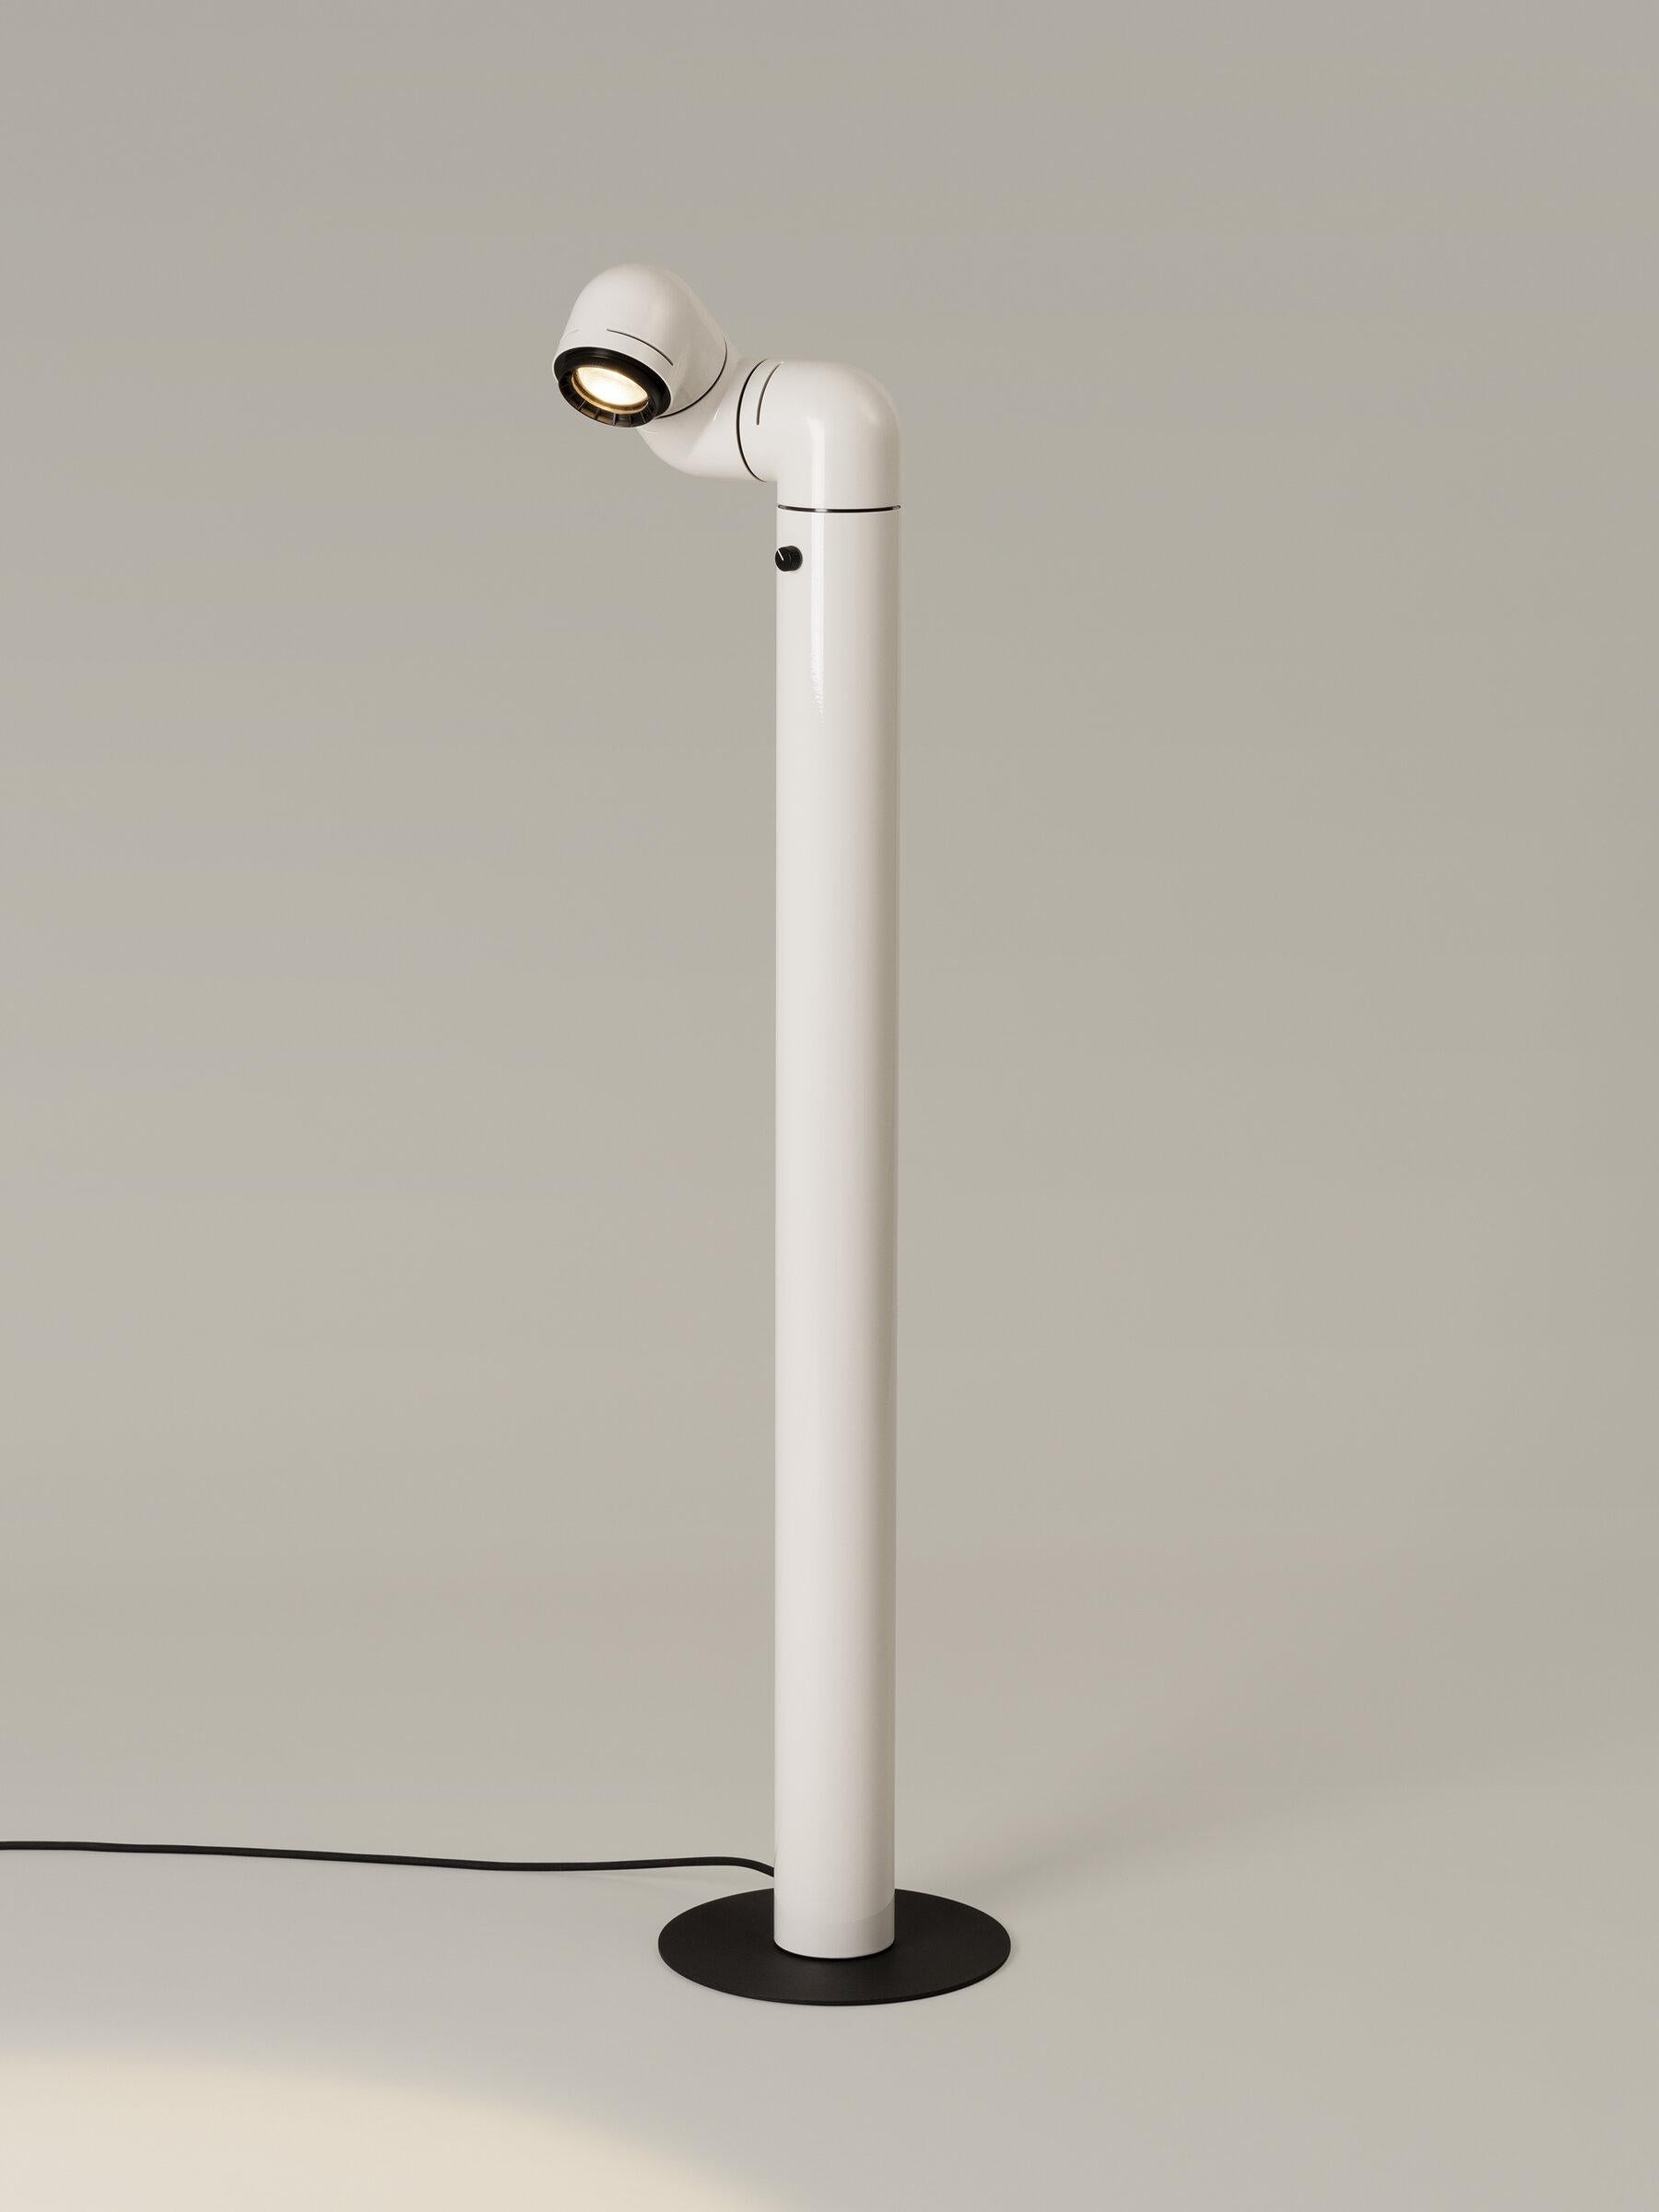 White Tatu floor lamp by André Ricard
Dimensions: D 23 x W 26 x H 116 cm
Materials: Metal, plastic.
Available in red or white.

This friendly lamp, a revolutionary milestone in design, is essential in any context, directing light wherever it is